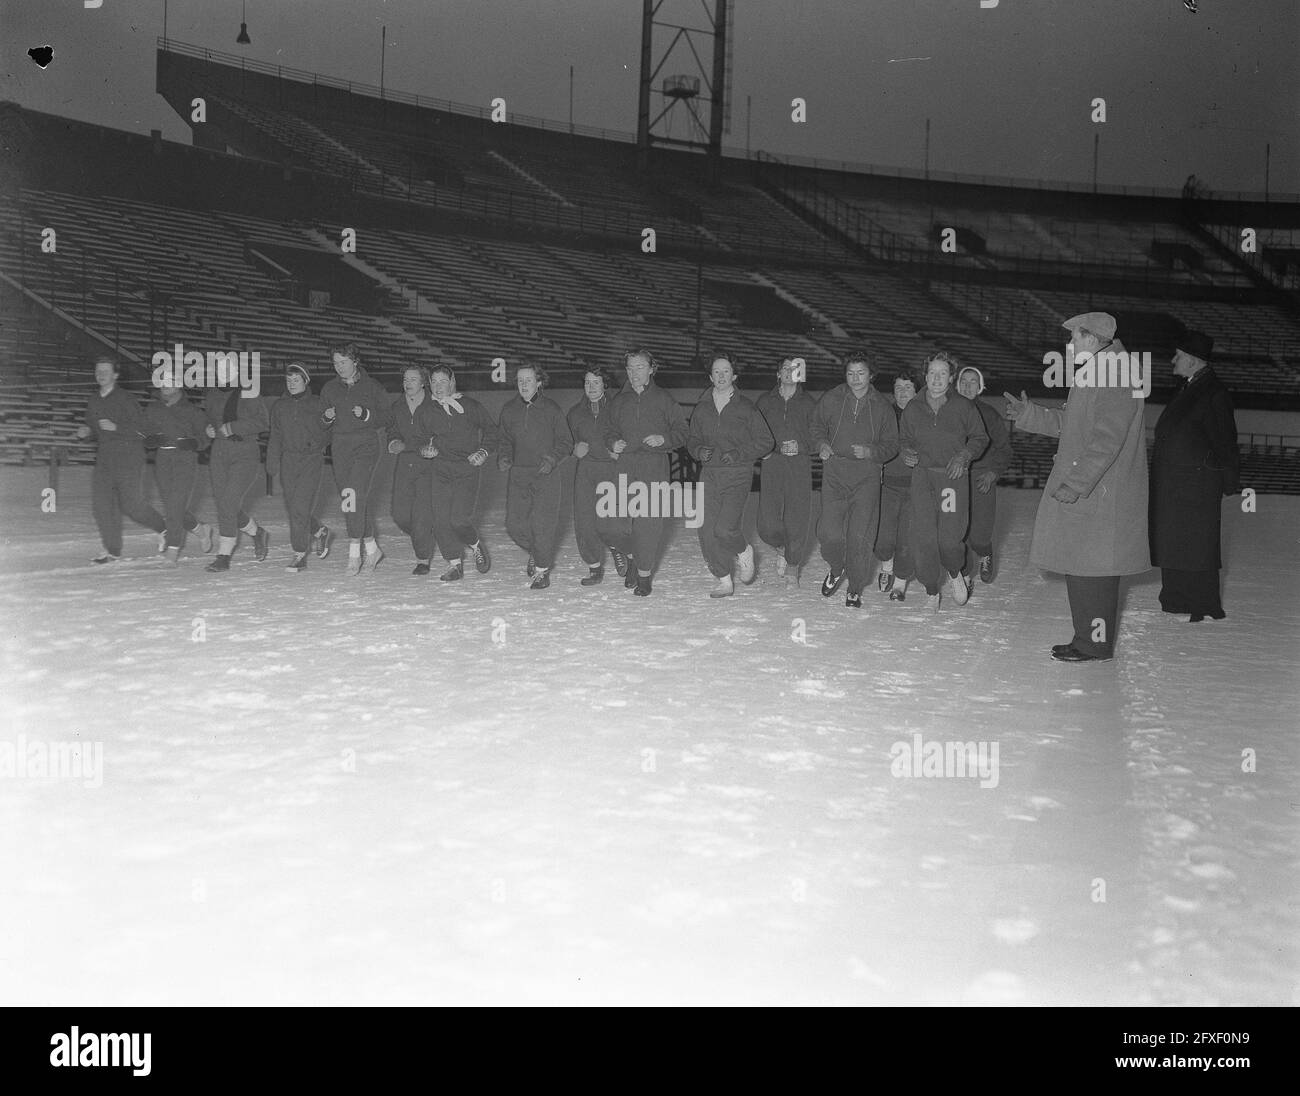 Training ladies Hockey team Amsterdam, February 23, 1956, field hockey teams, The Netherlands, 20th century press agency photo, news to remember, documentary, historic photography 1945-1990, visual stories, human history of the Twentieth Century, capturing moments in time Stock Photo